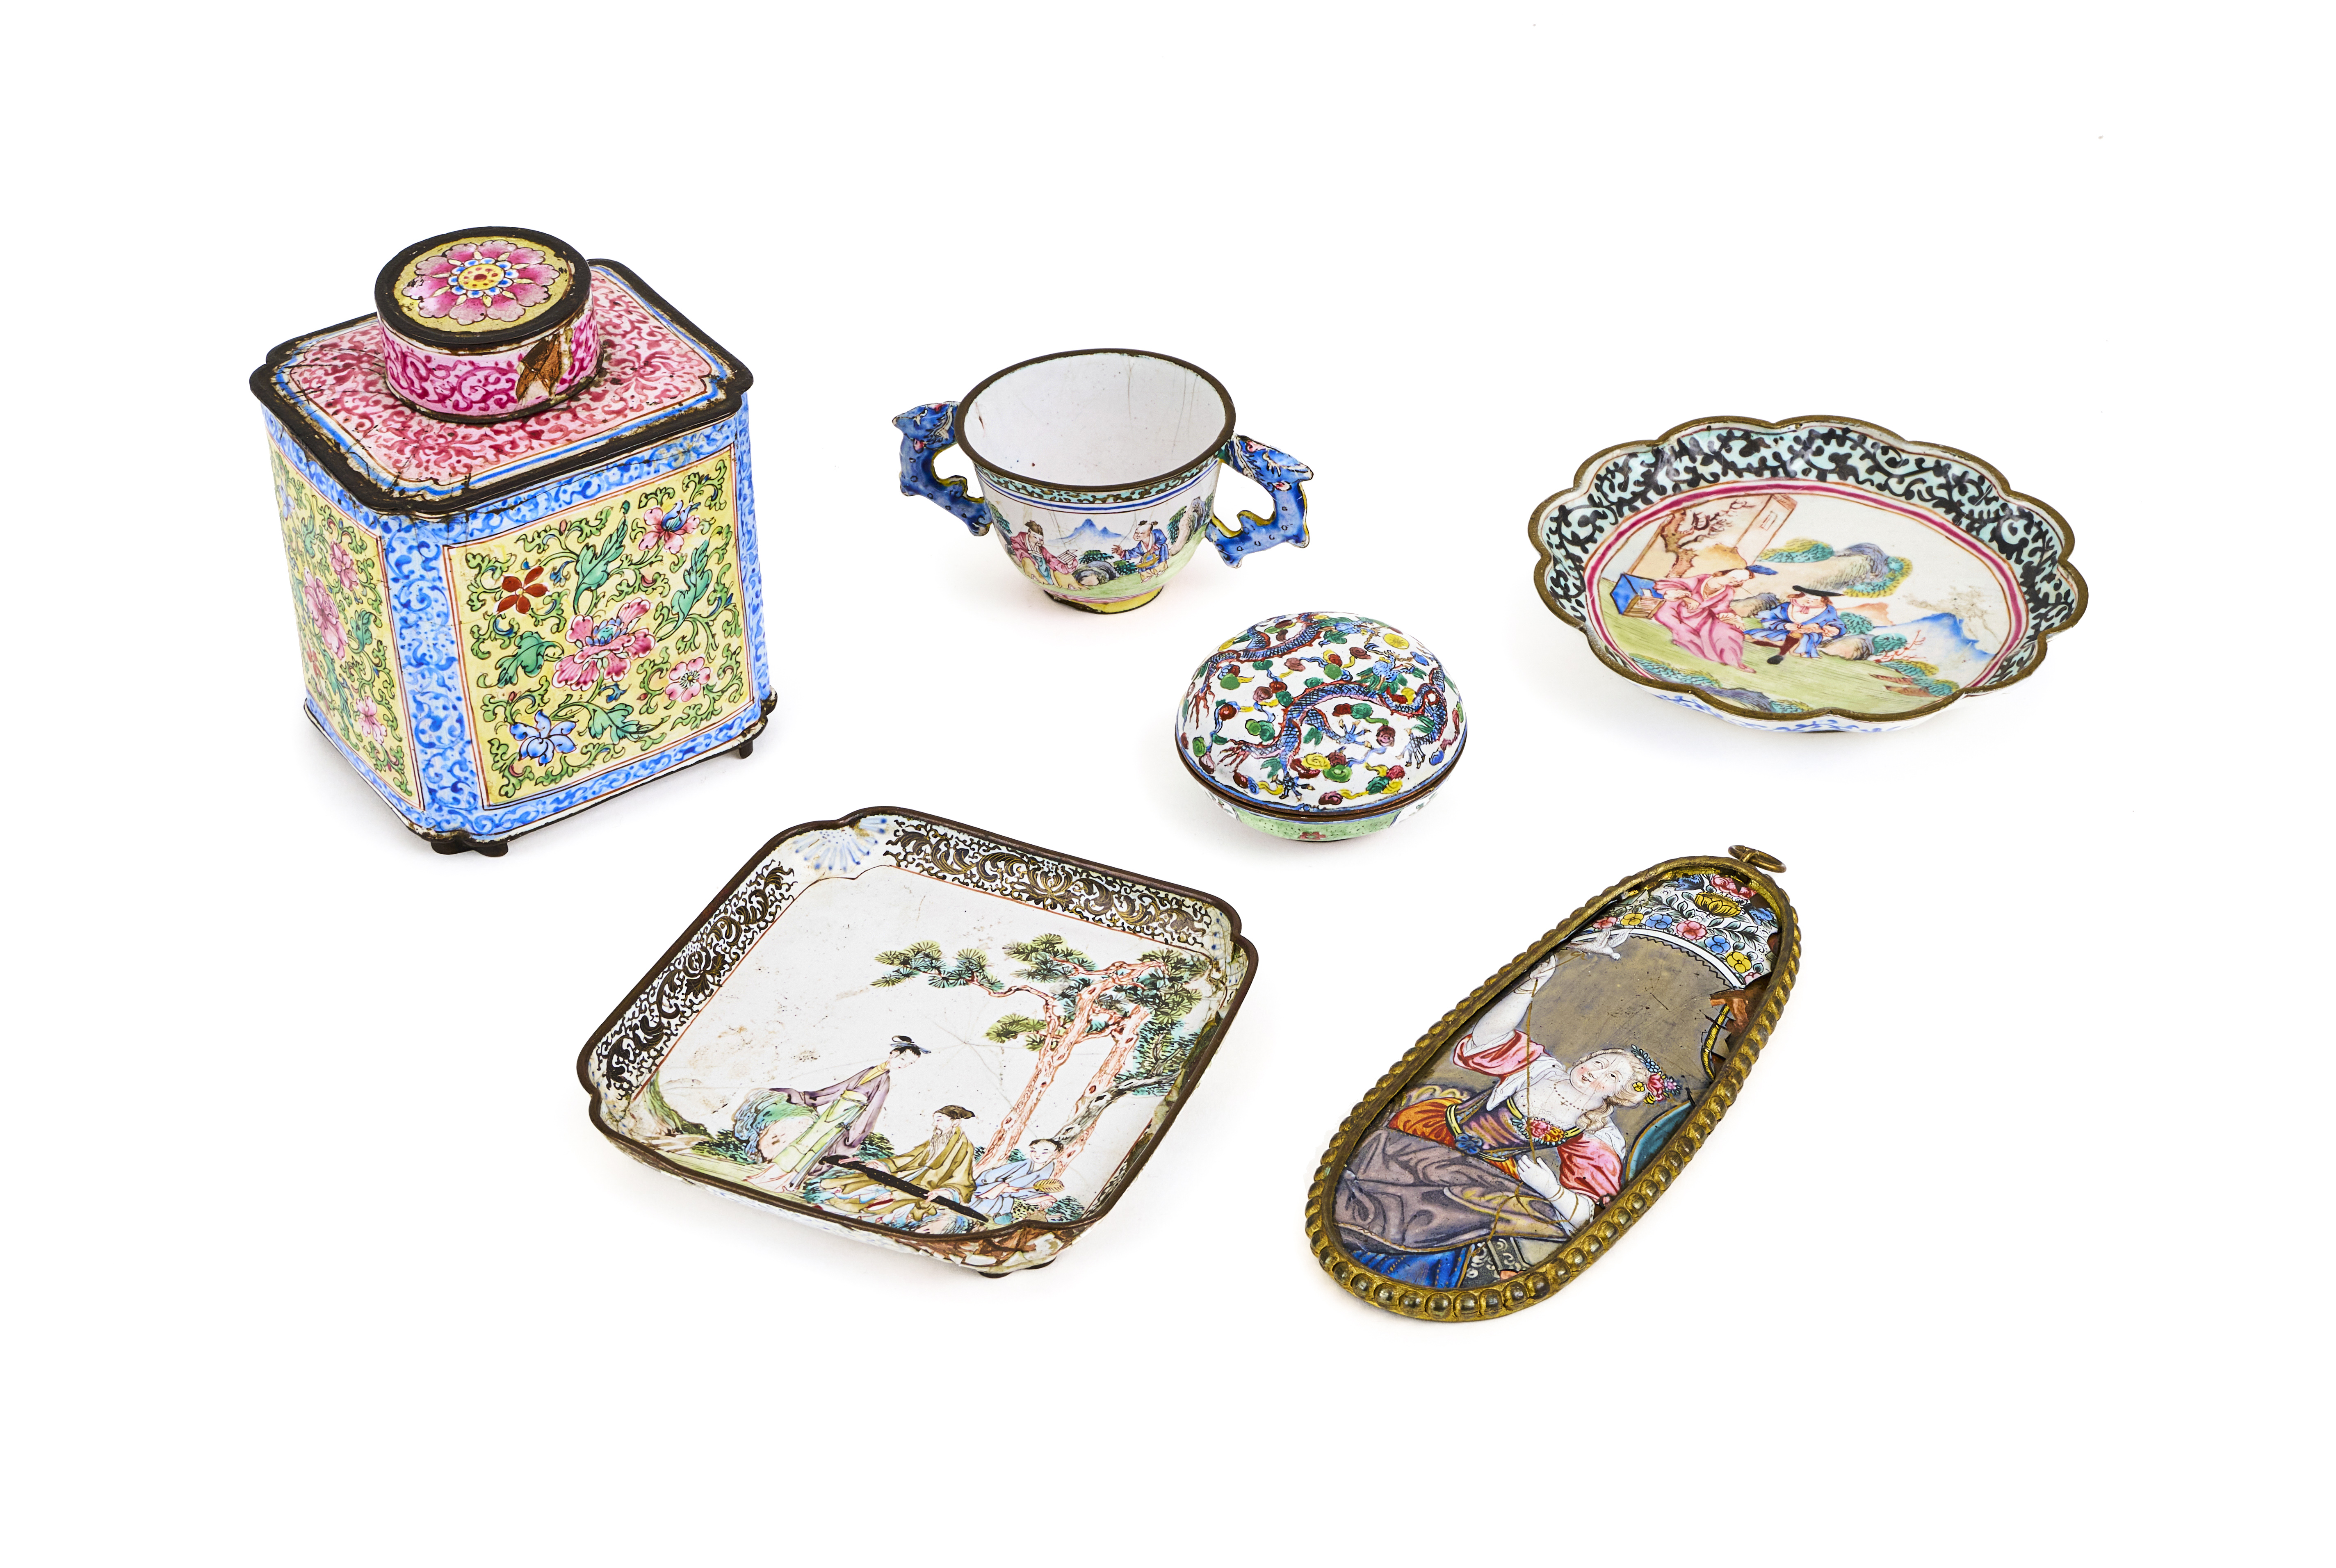 ASSORTMENT OF CHINESE CANTON ENAMEL OBJECTS, 18TH/19TH CENTURY